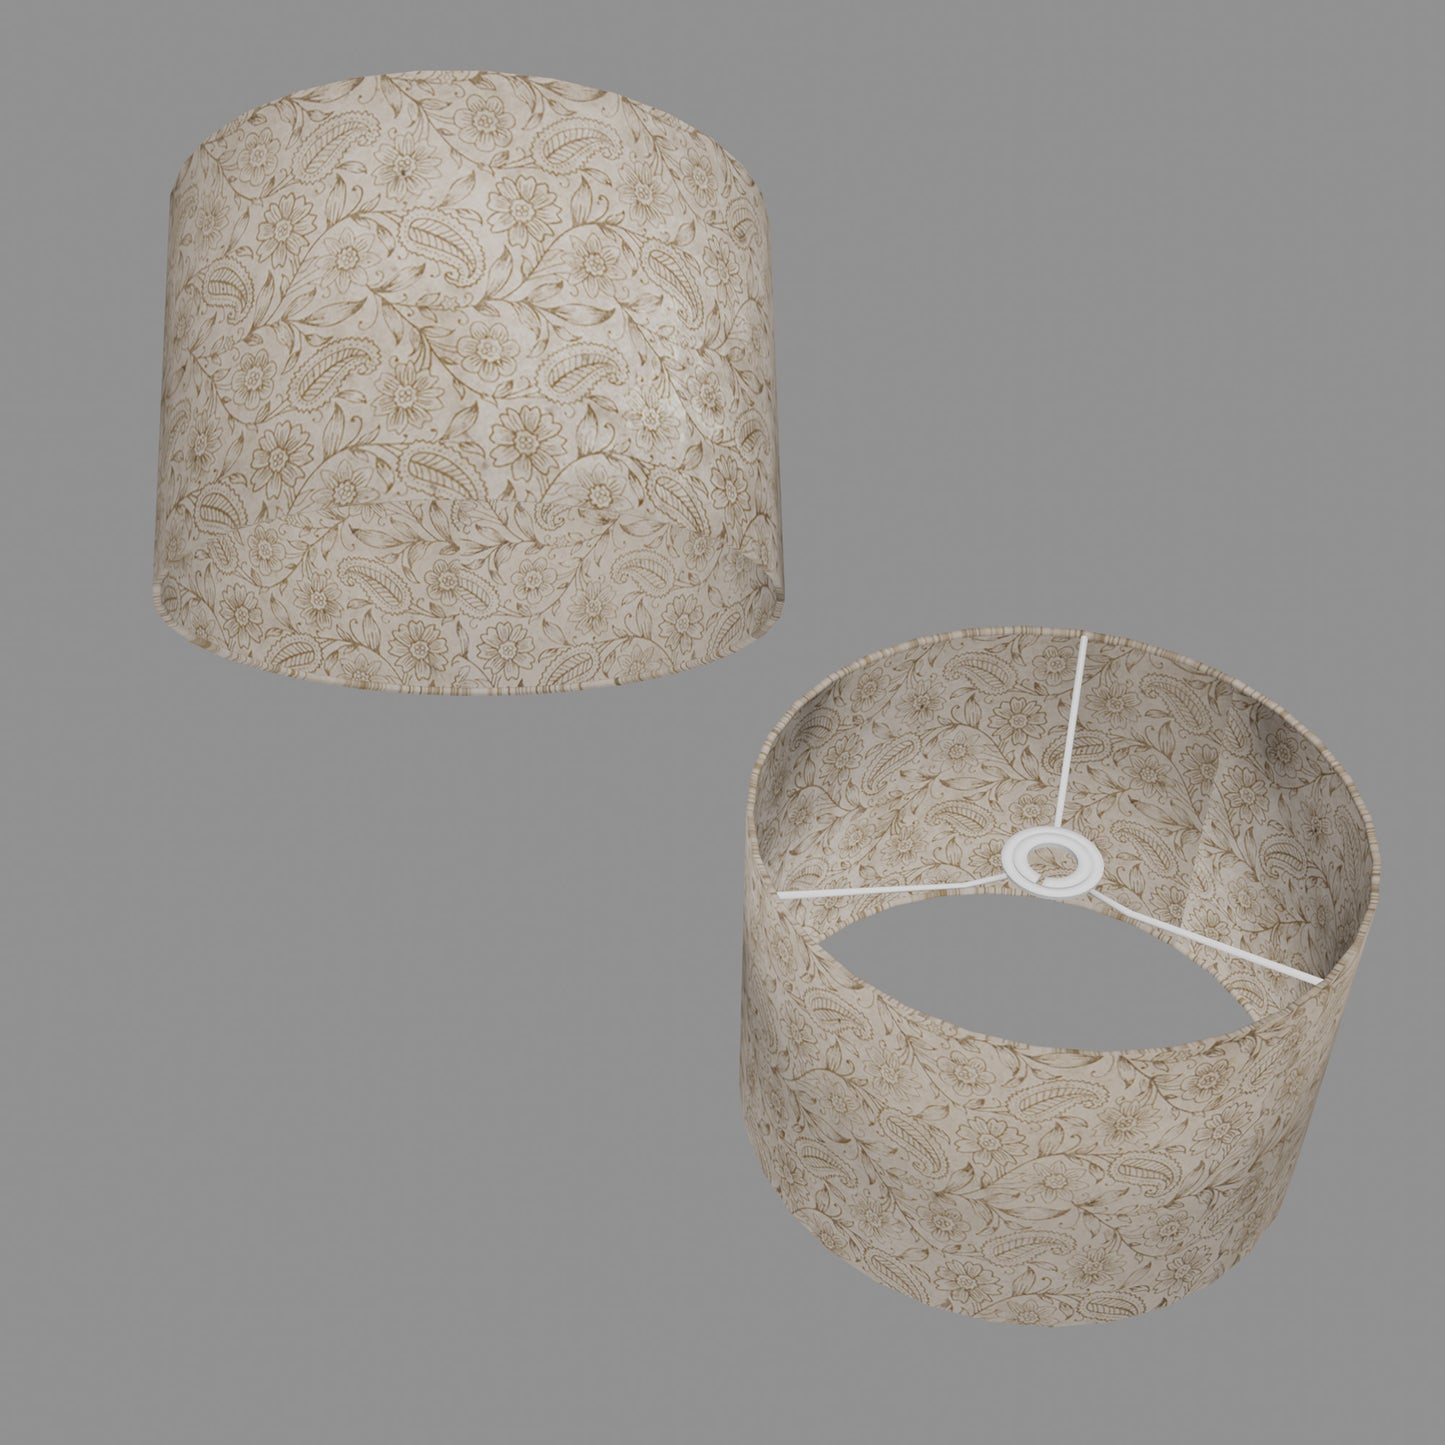 Drum Lamp Shade - P69 - Garden Gold on Natural, 30cm(d) x 20cm(h)